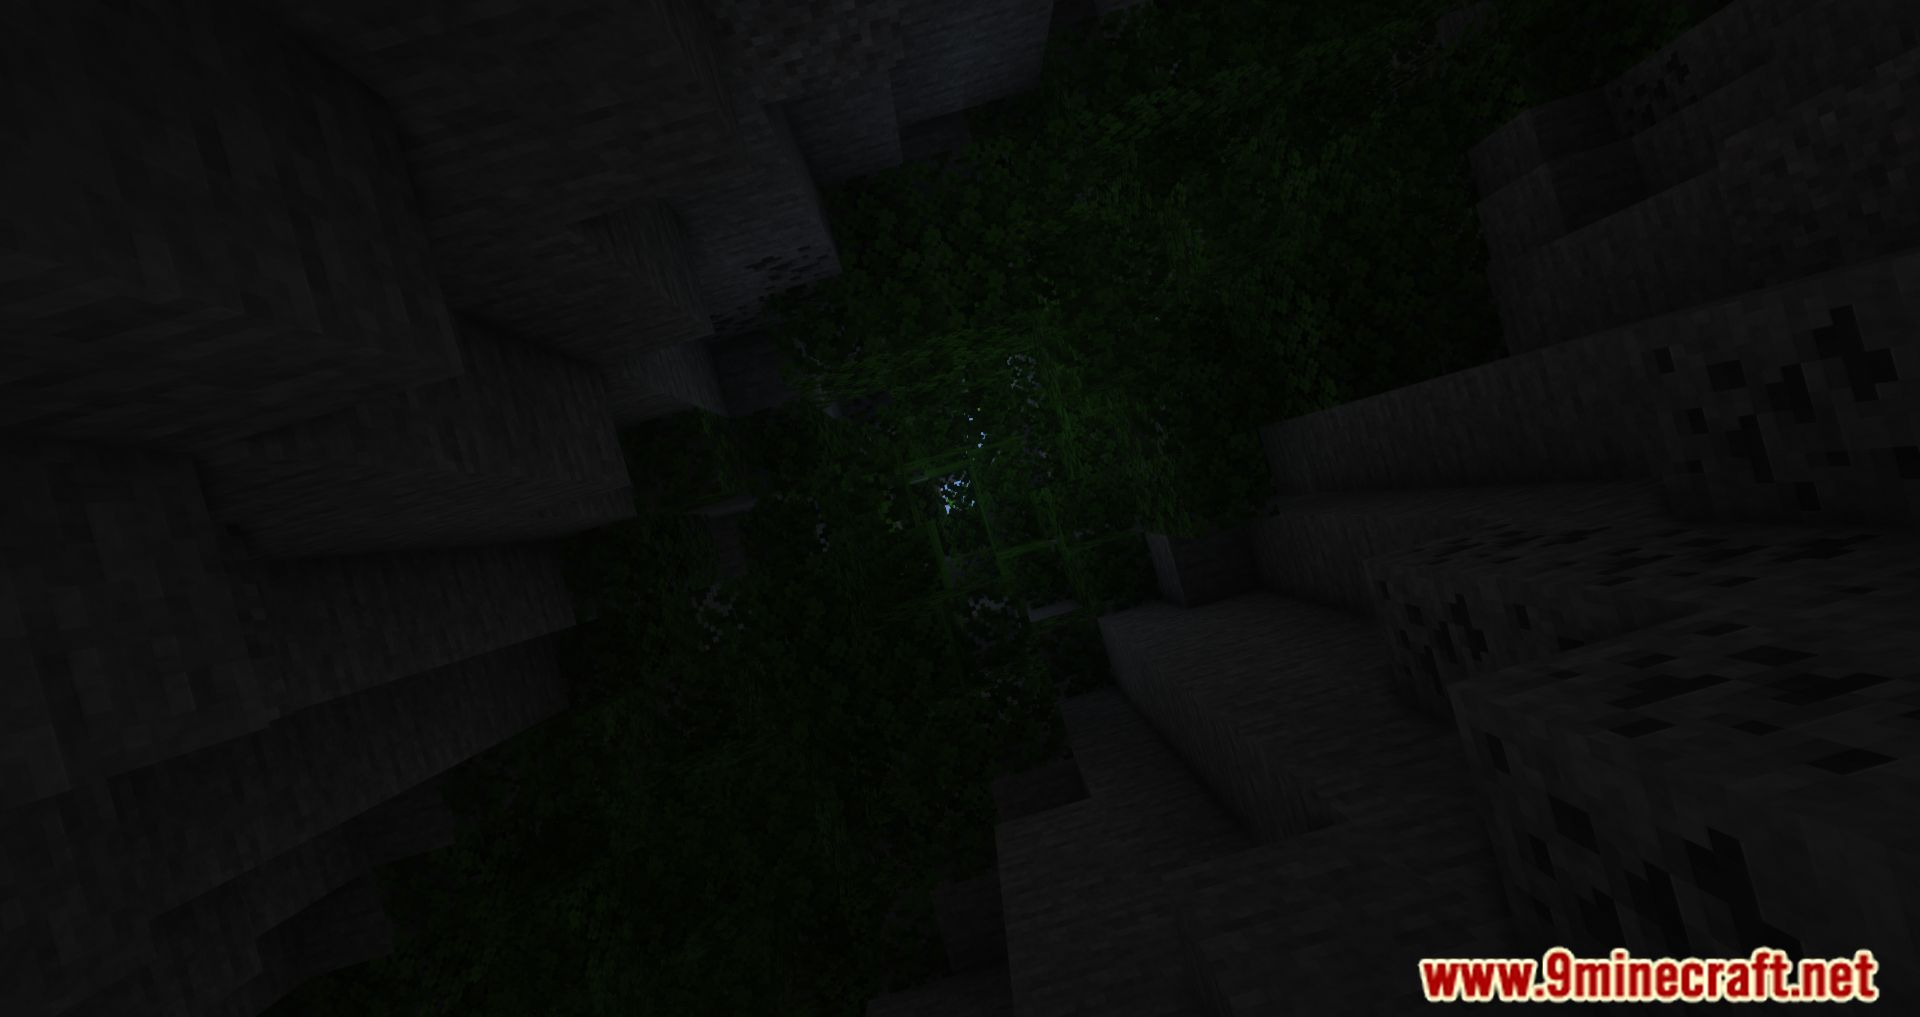 Cave Generator Mod (1.16.5, 1.12.2) - Fully Customize Mojang's Tunnels 11